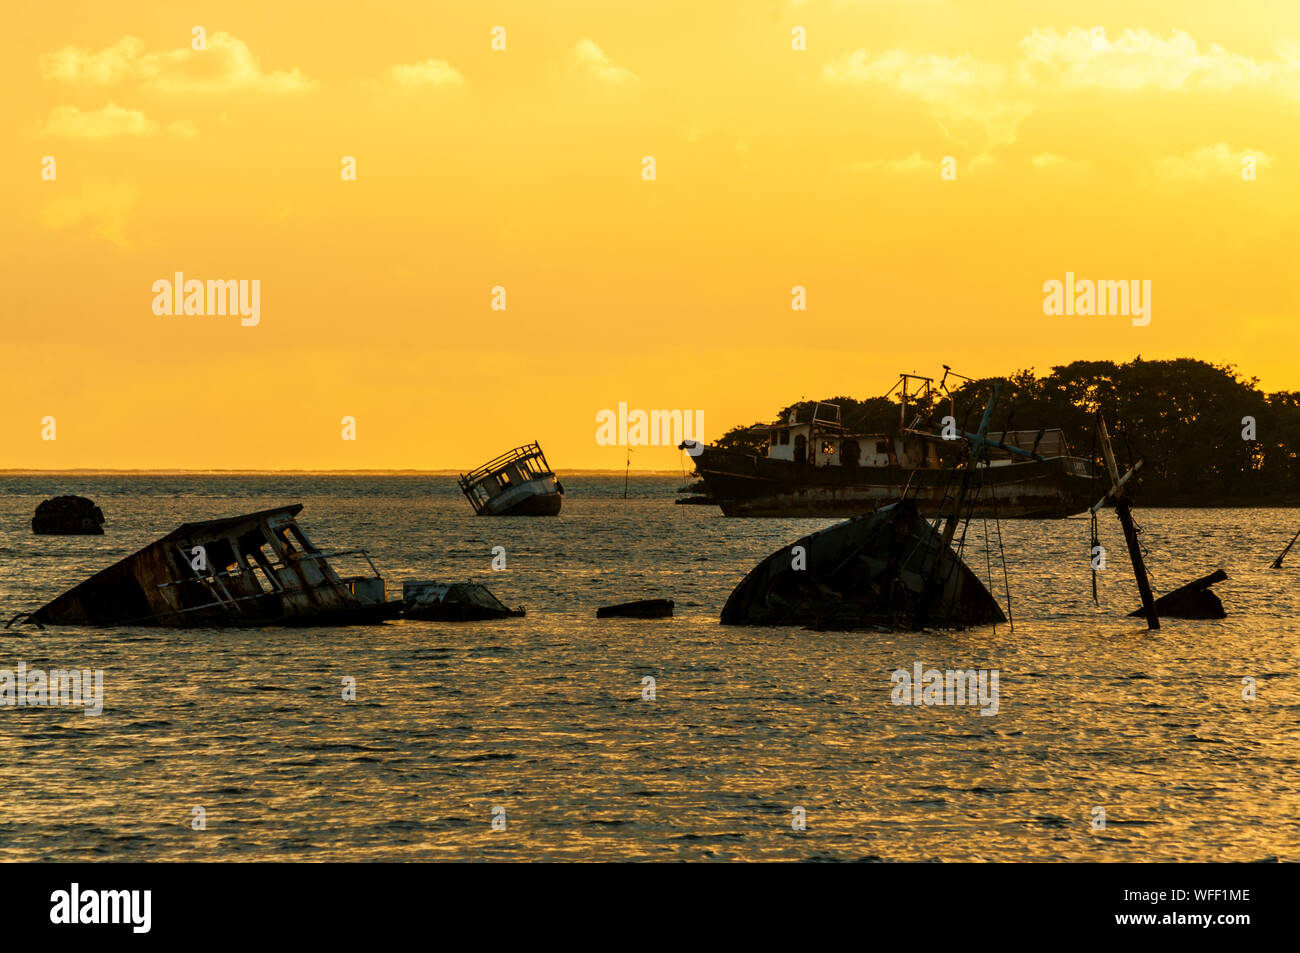 Shipwrecks In Sea Against Sky During Sunset Stock Photo